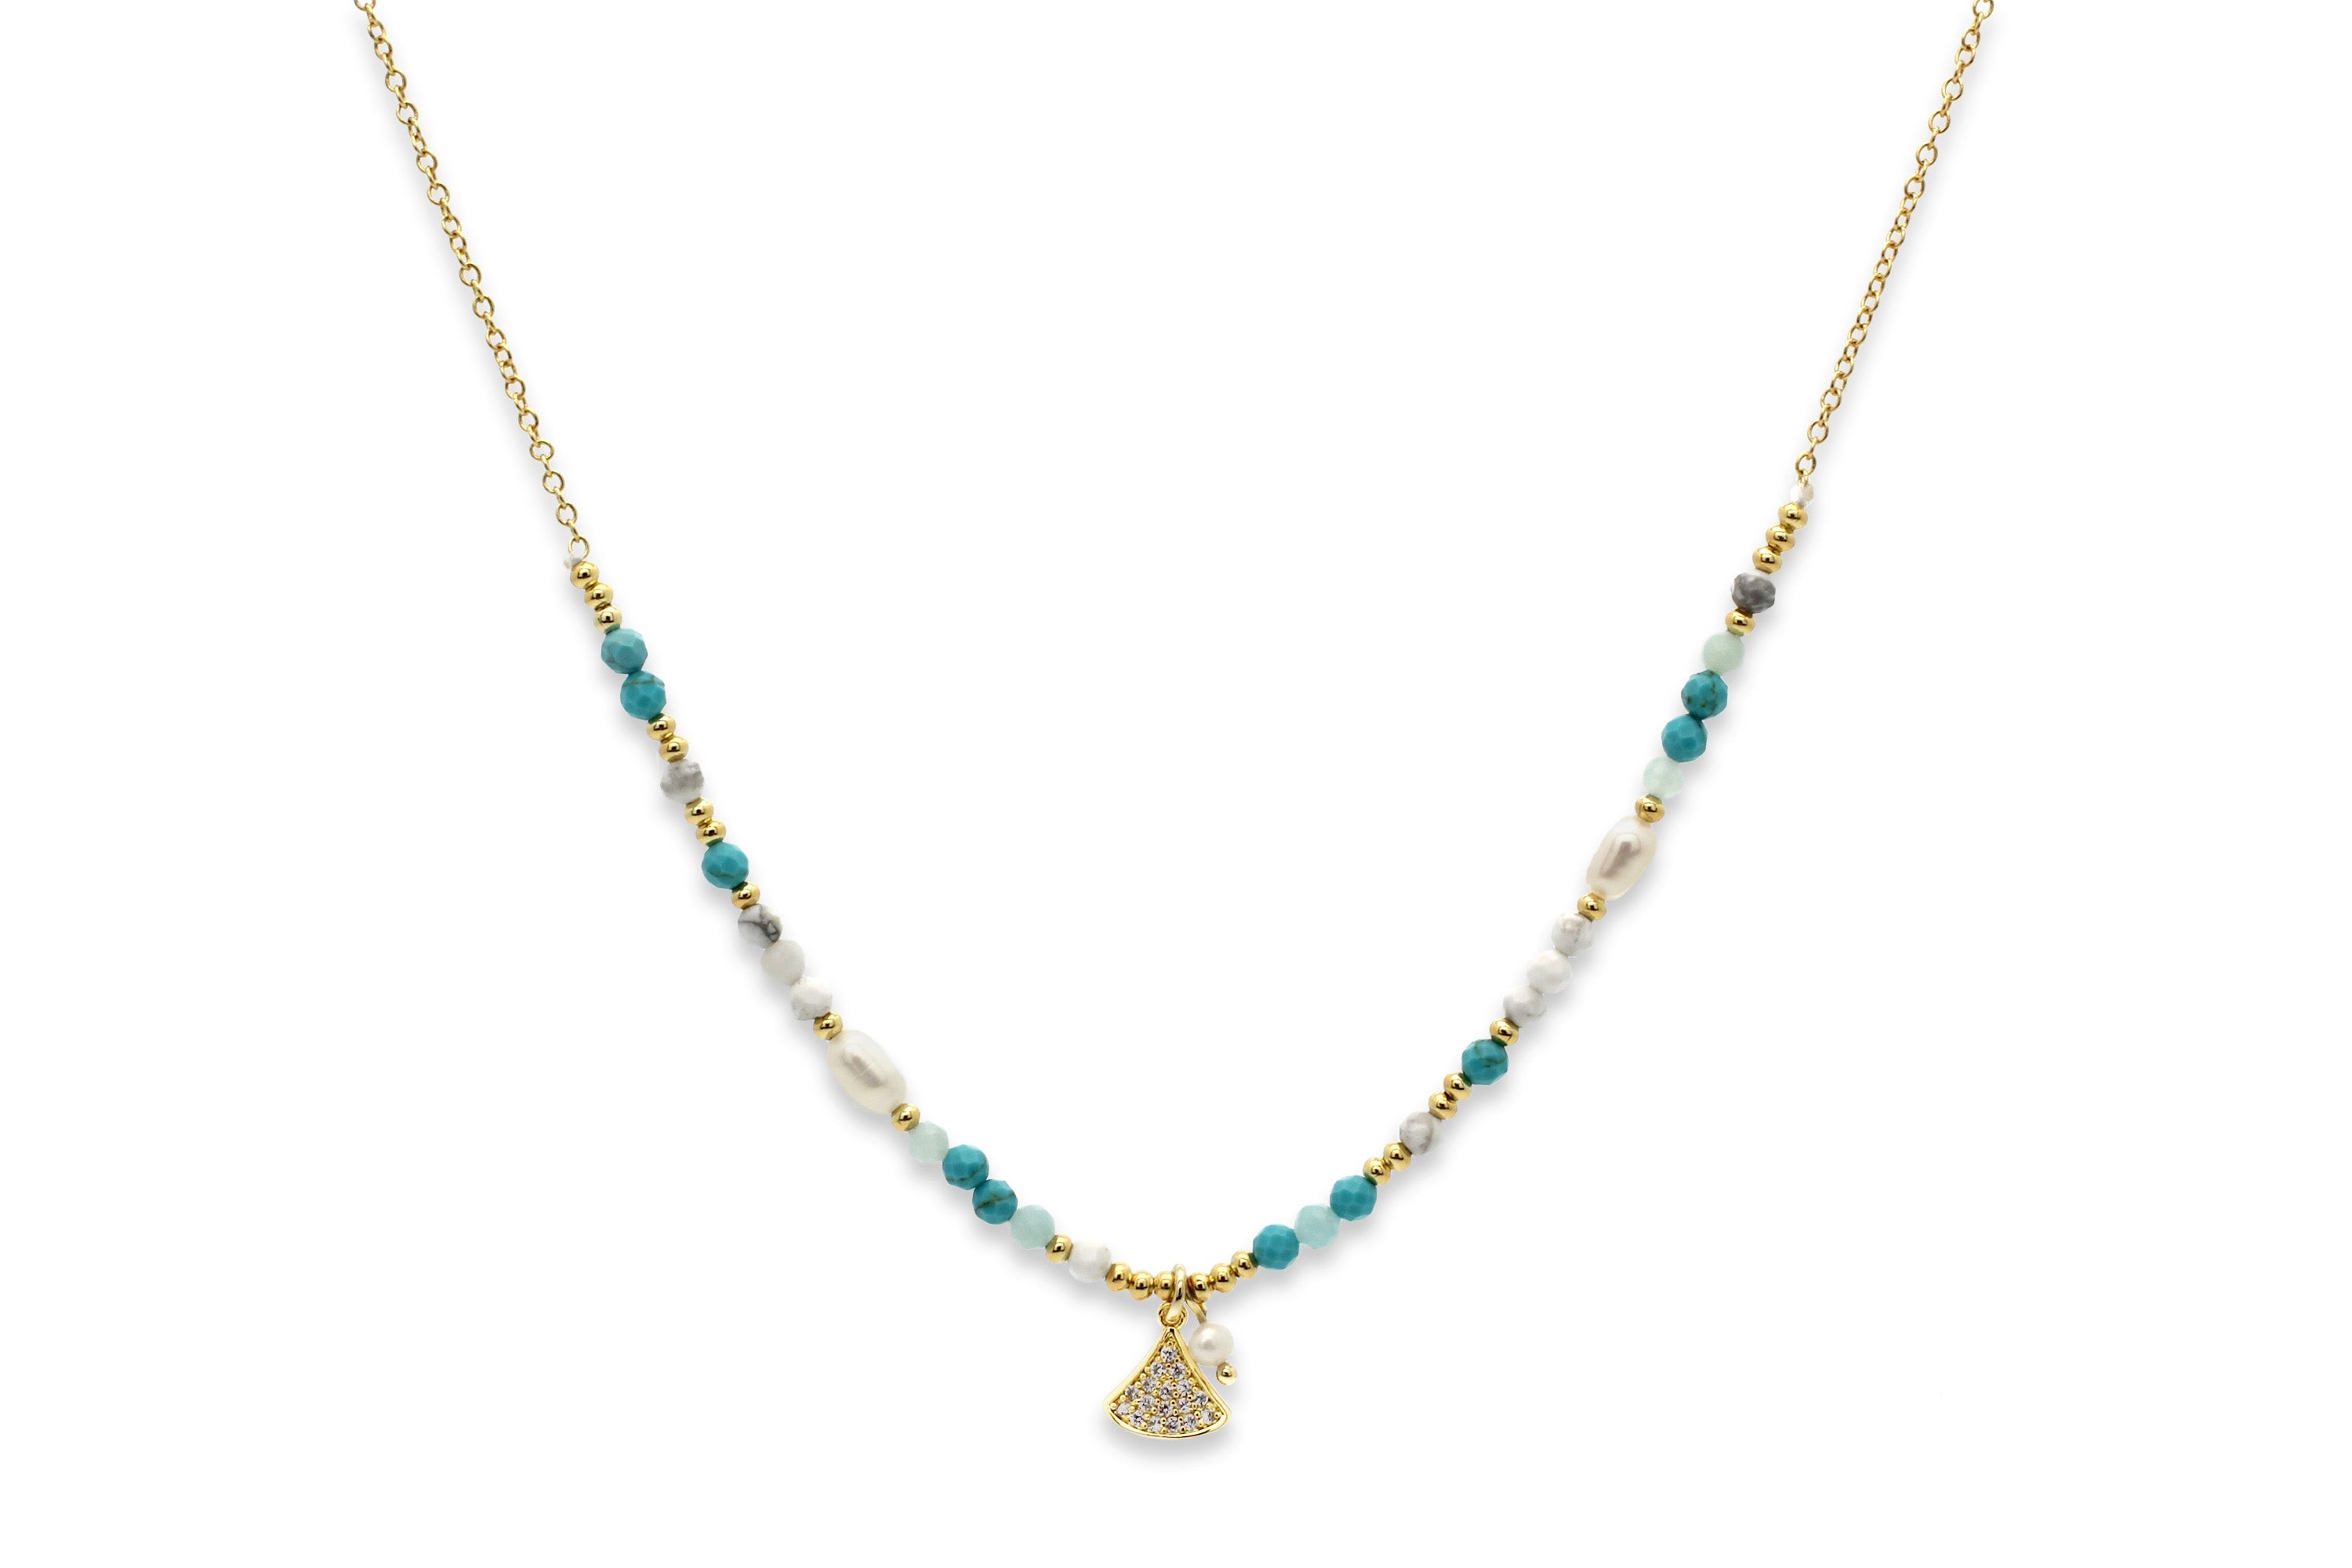 Parvati Pearl & Turquoise Necklace - Boho Betty